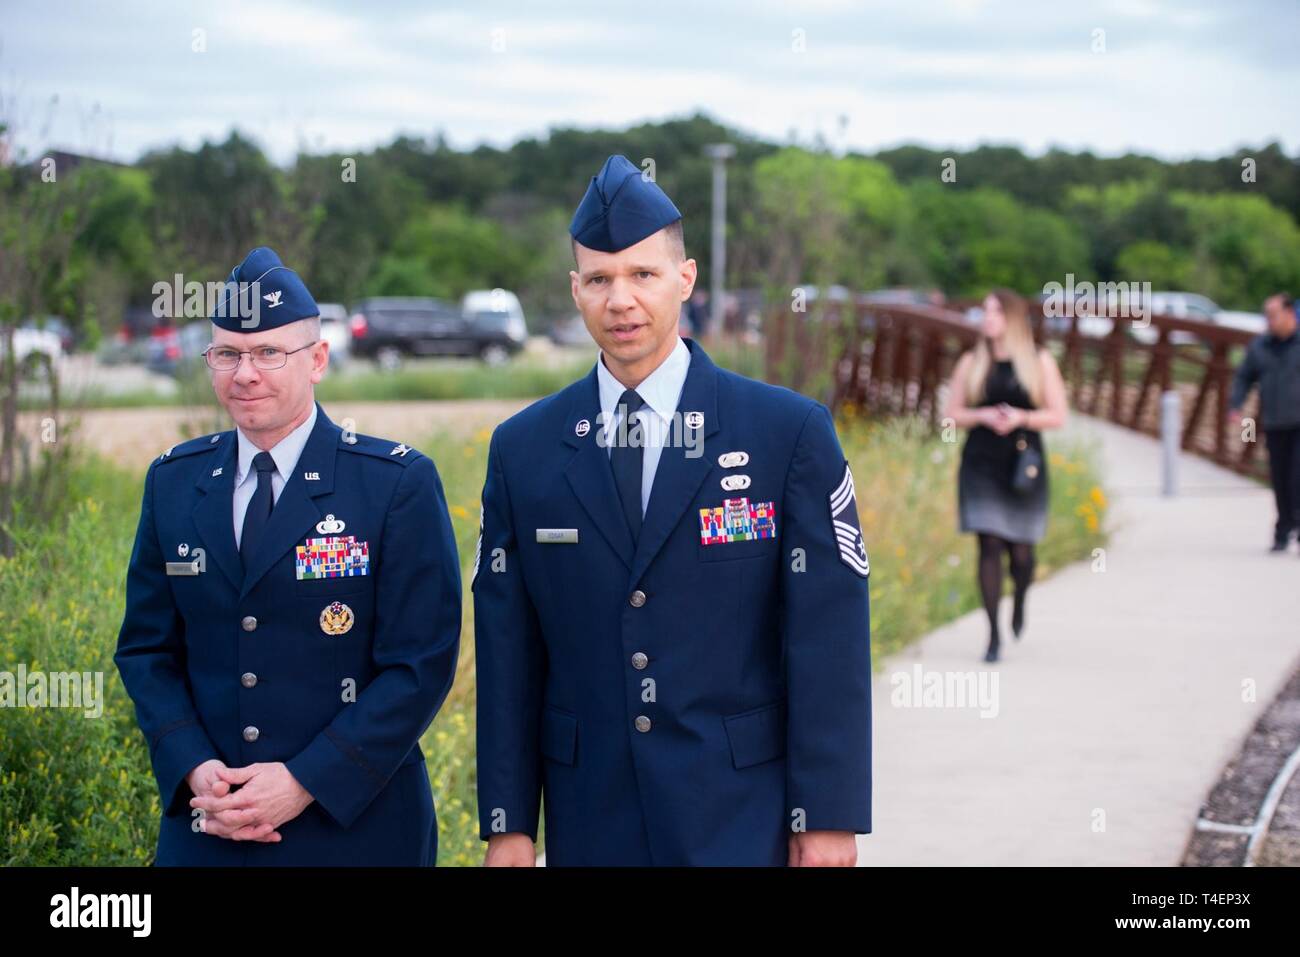 U.S. Air Force Col. Scott Thompson, 502d Installation Support Group commander, and Chief Master Sergeant Edward H. Edgar arrive at the Tribute to Freedom sculpture grand opening, Mar. 27, 2019, at the corner of U.S. Highway 90 and Military Drive. The event marked the completion of phase one of the Lackland Corridor Gateway Project. Designed by George Schroeder, the art sculpture piece includes five forms representing the five branches of the U.S. Armed Forces, with a central obelisk modeled after the Washington Monument. Stock Photo